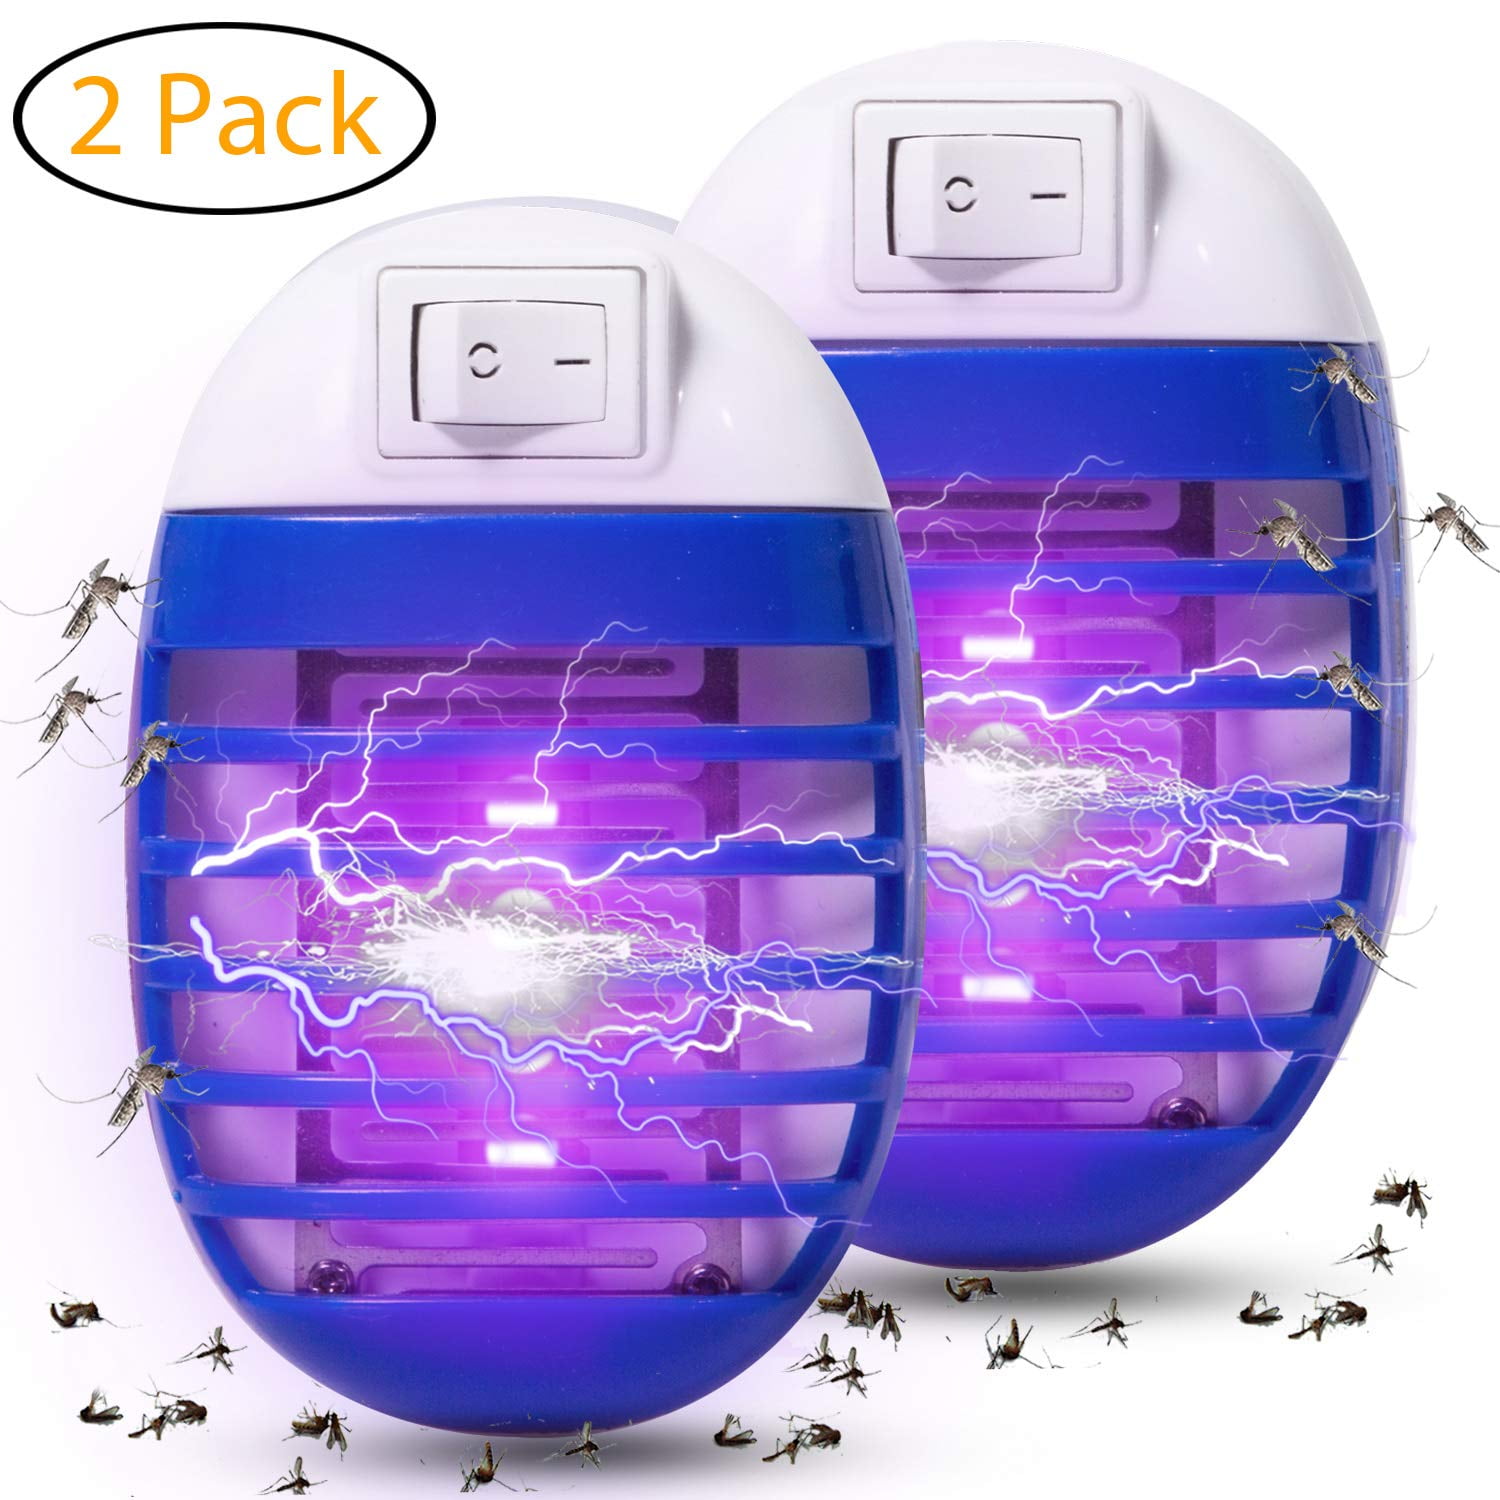 2Pcs Electronic Mosquito Fly Bug Zapper Killer Lamp Trap Catcher Light Safety US 